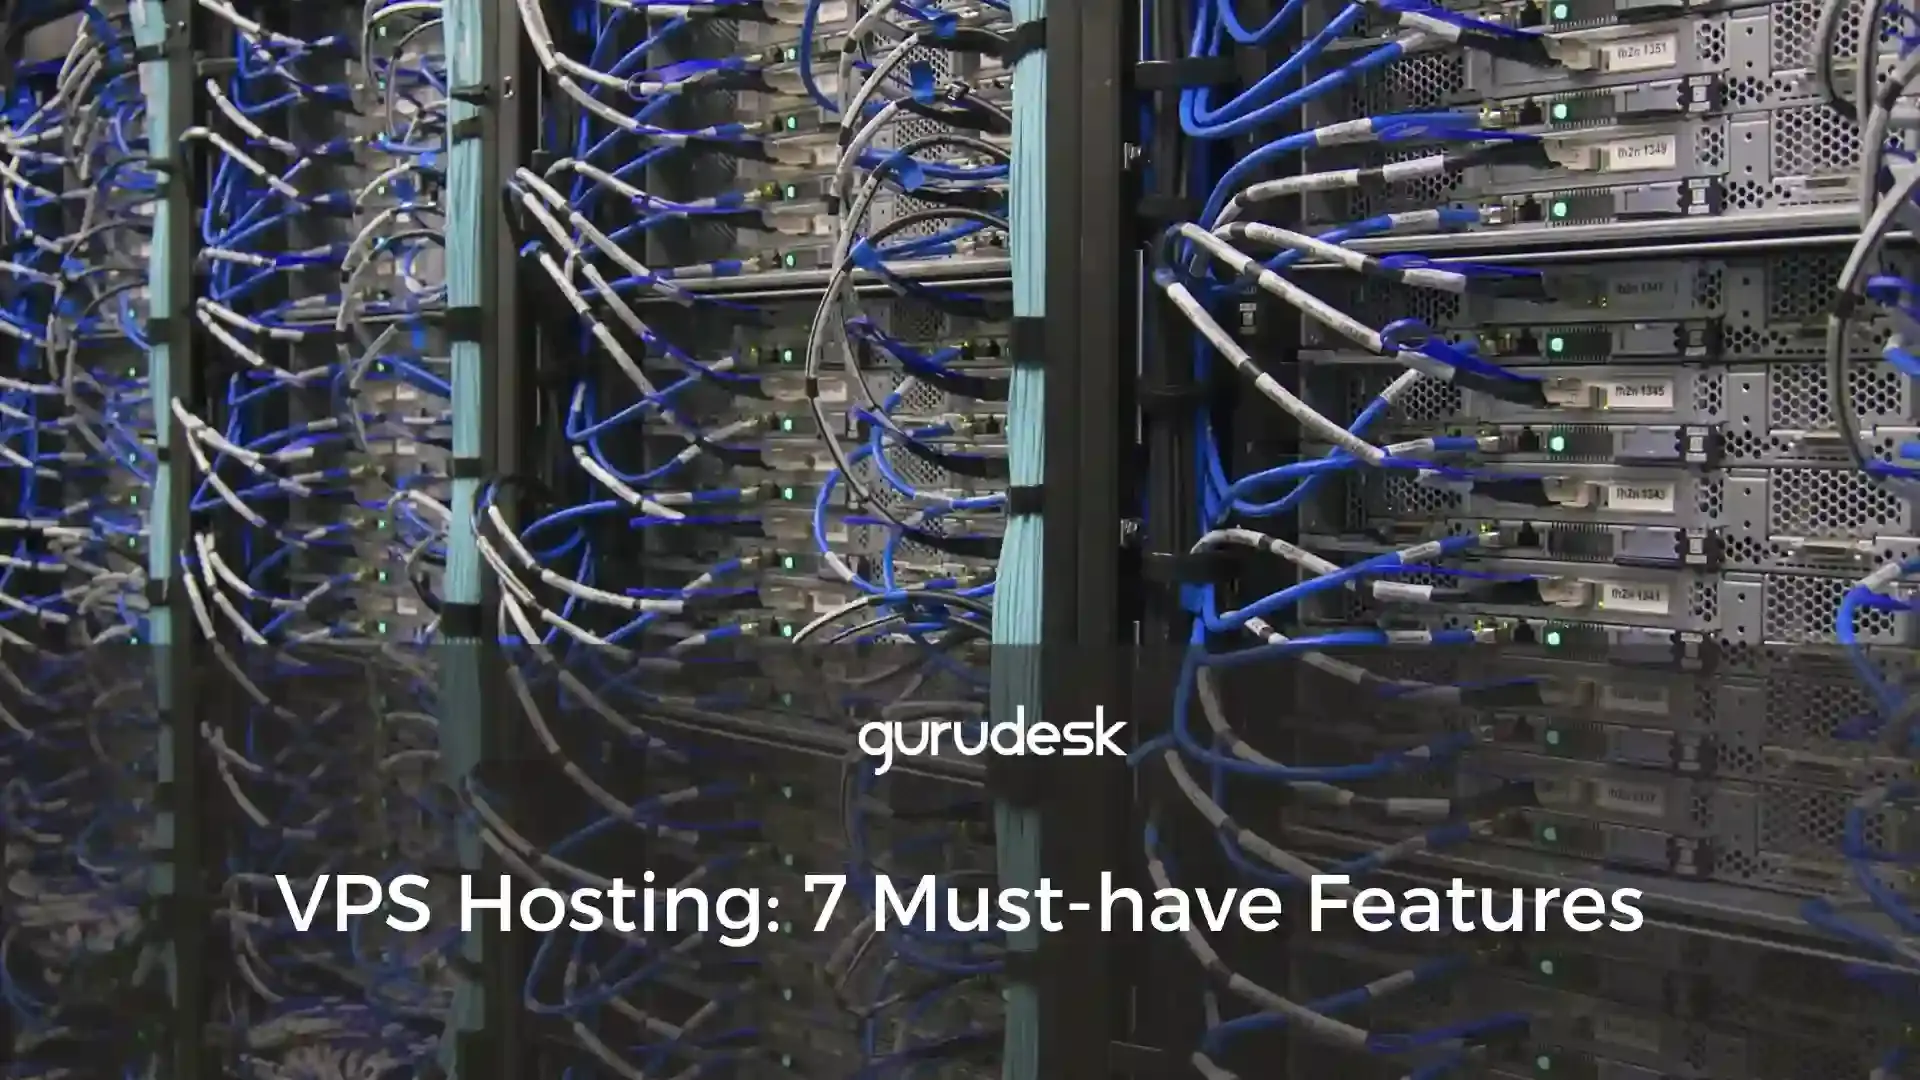 VPS Hosting 7 must have features